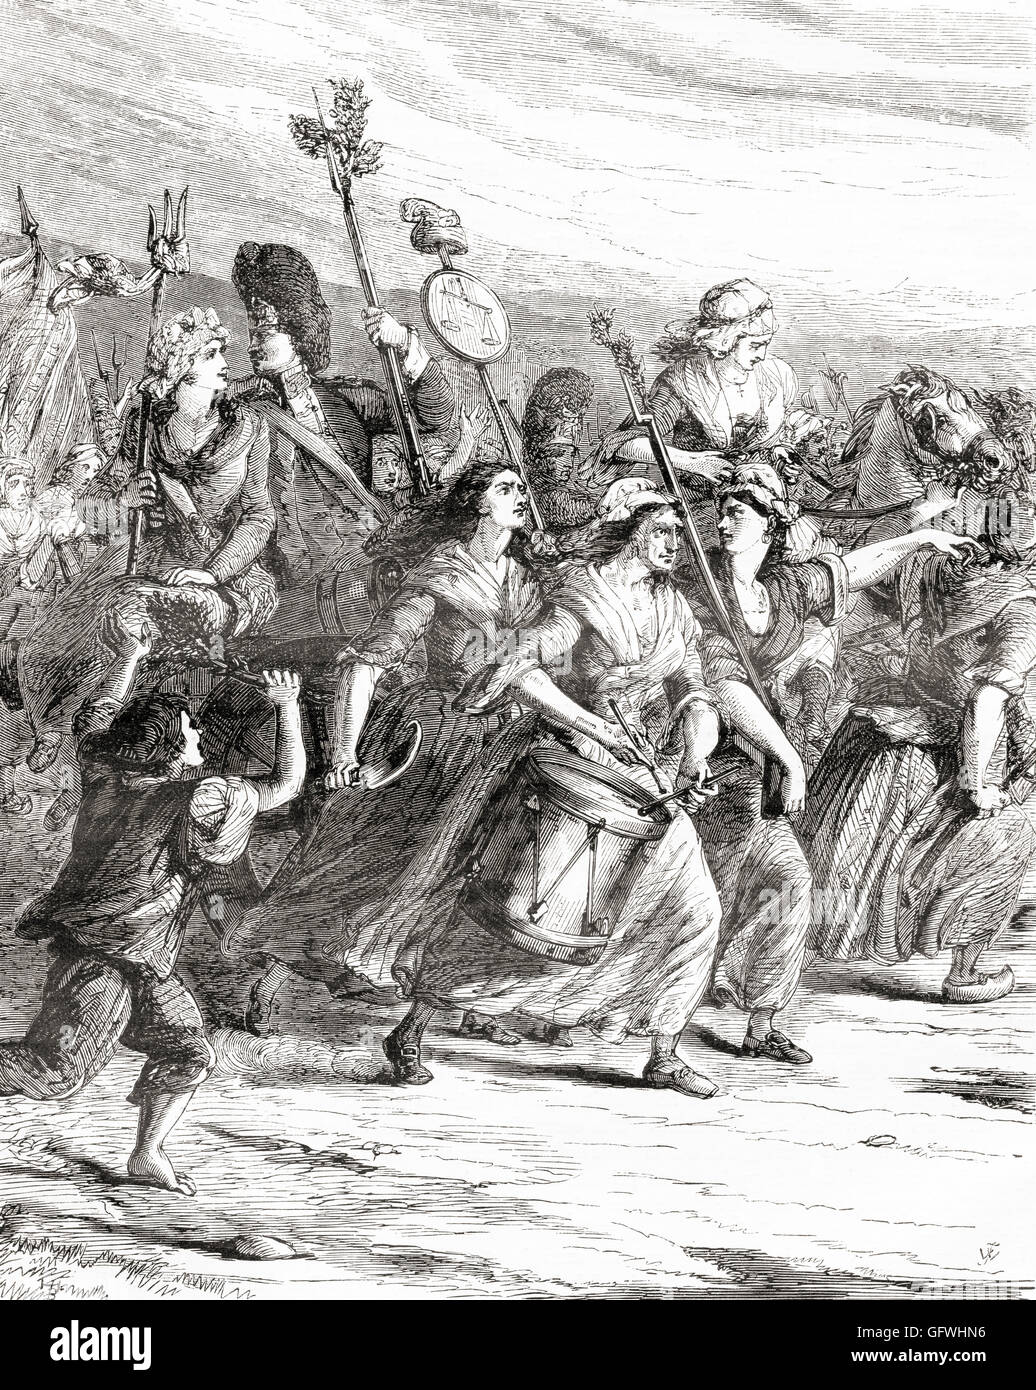 March of the poissardes, or market women, to Versailles on 5th October 1789 during the French Revolution, to demand bread and justice. Stock Photo